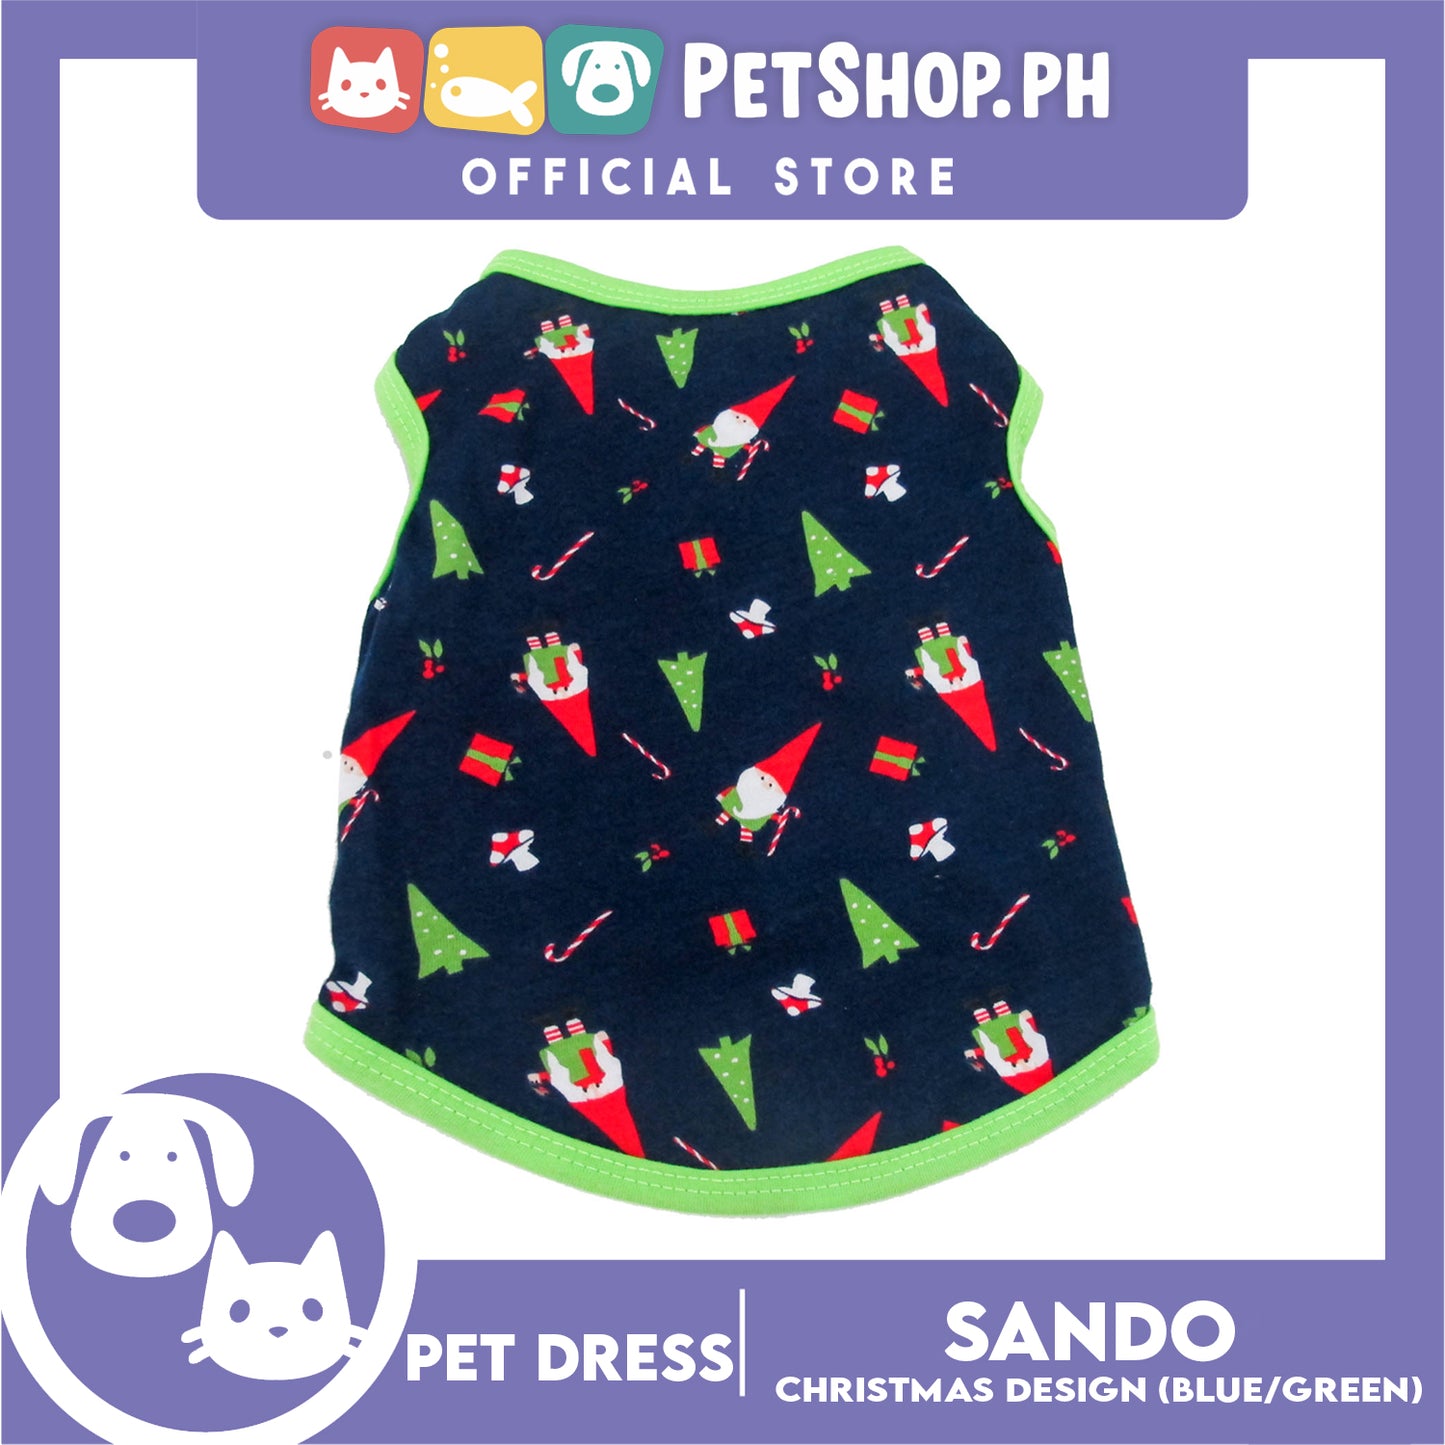 Pet Shirt Blue Christmas Design with Green Piping (Extra Large) Sleeveless for Puppy Small Dog & Cat